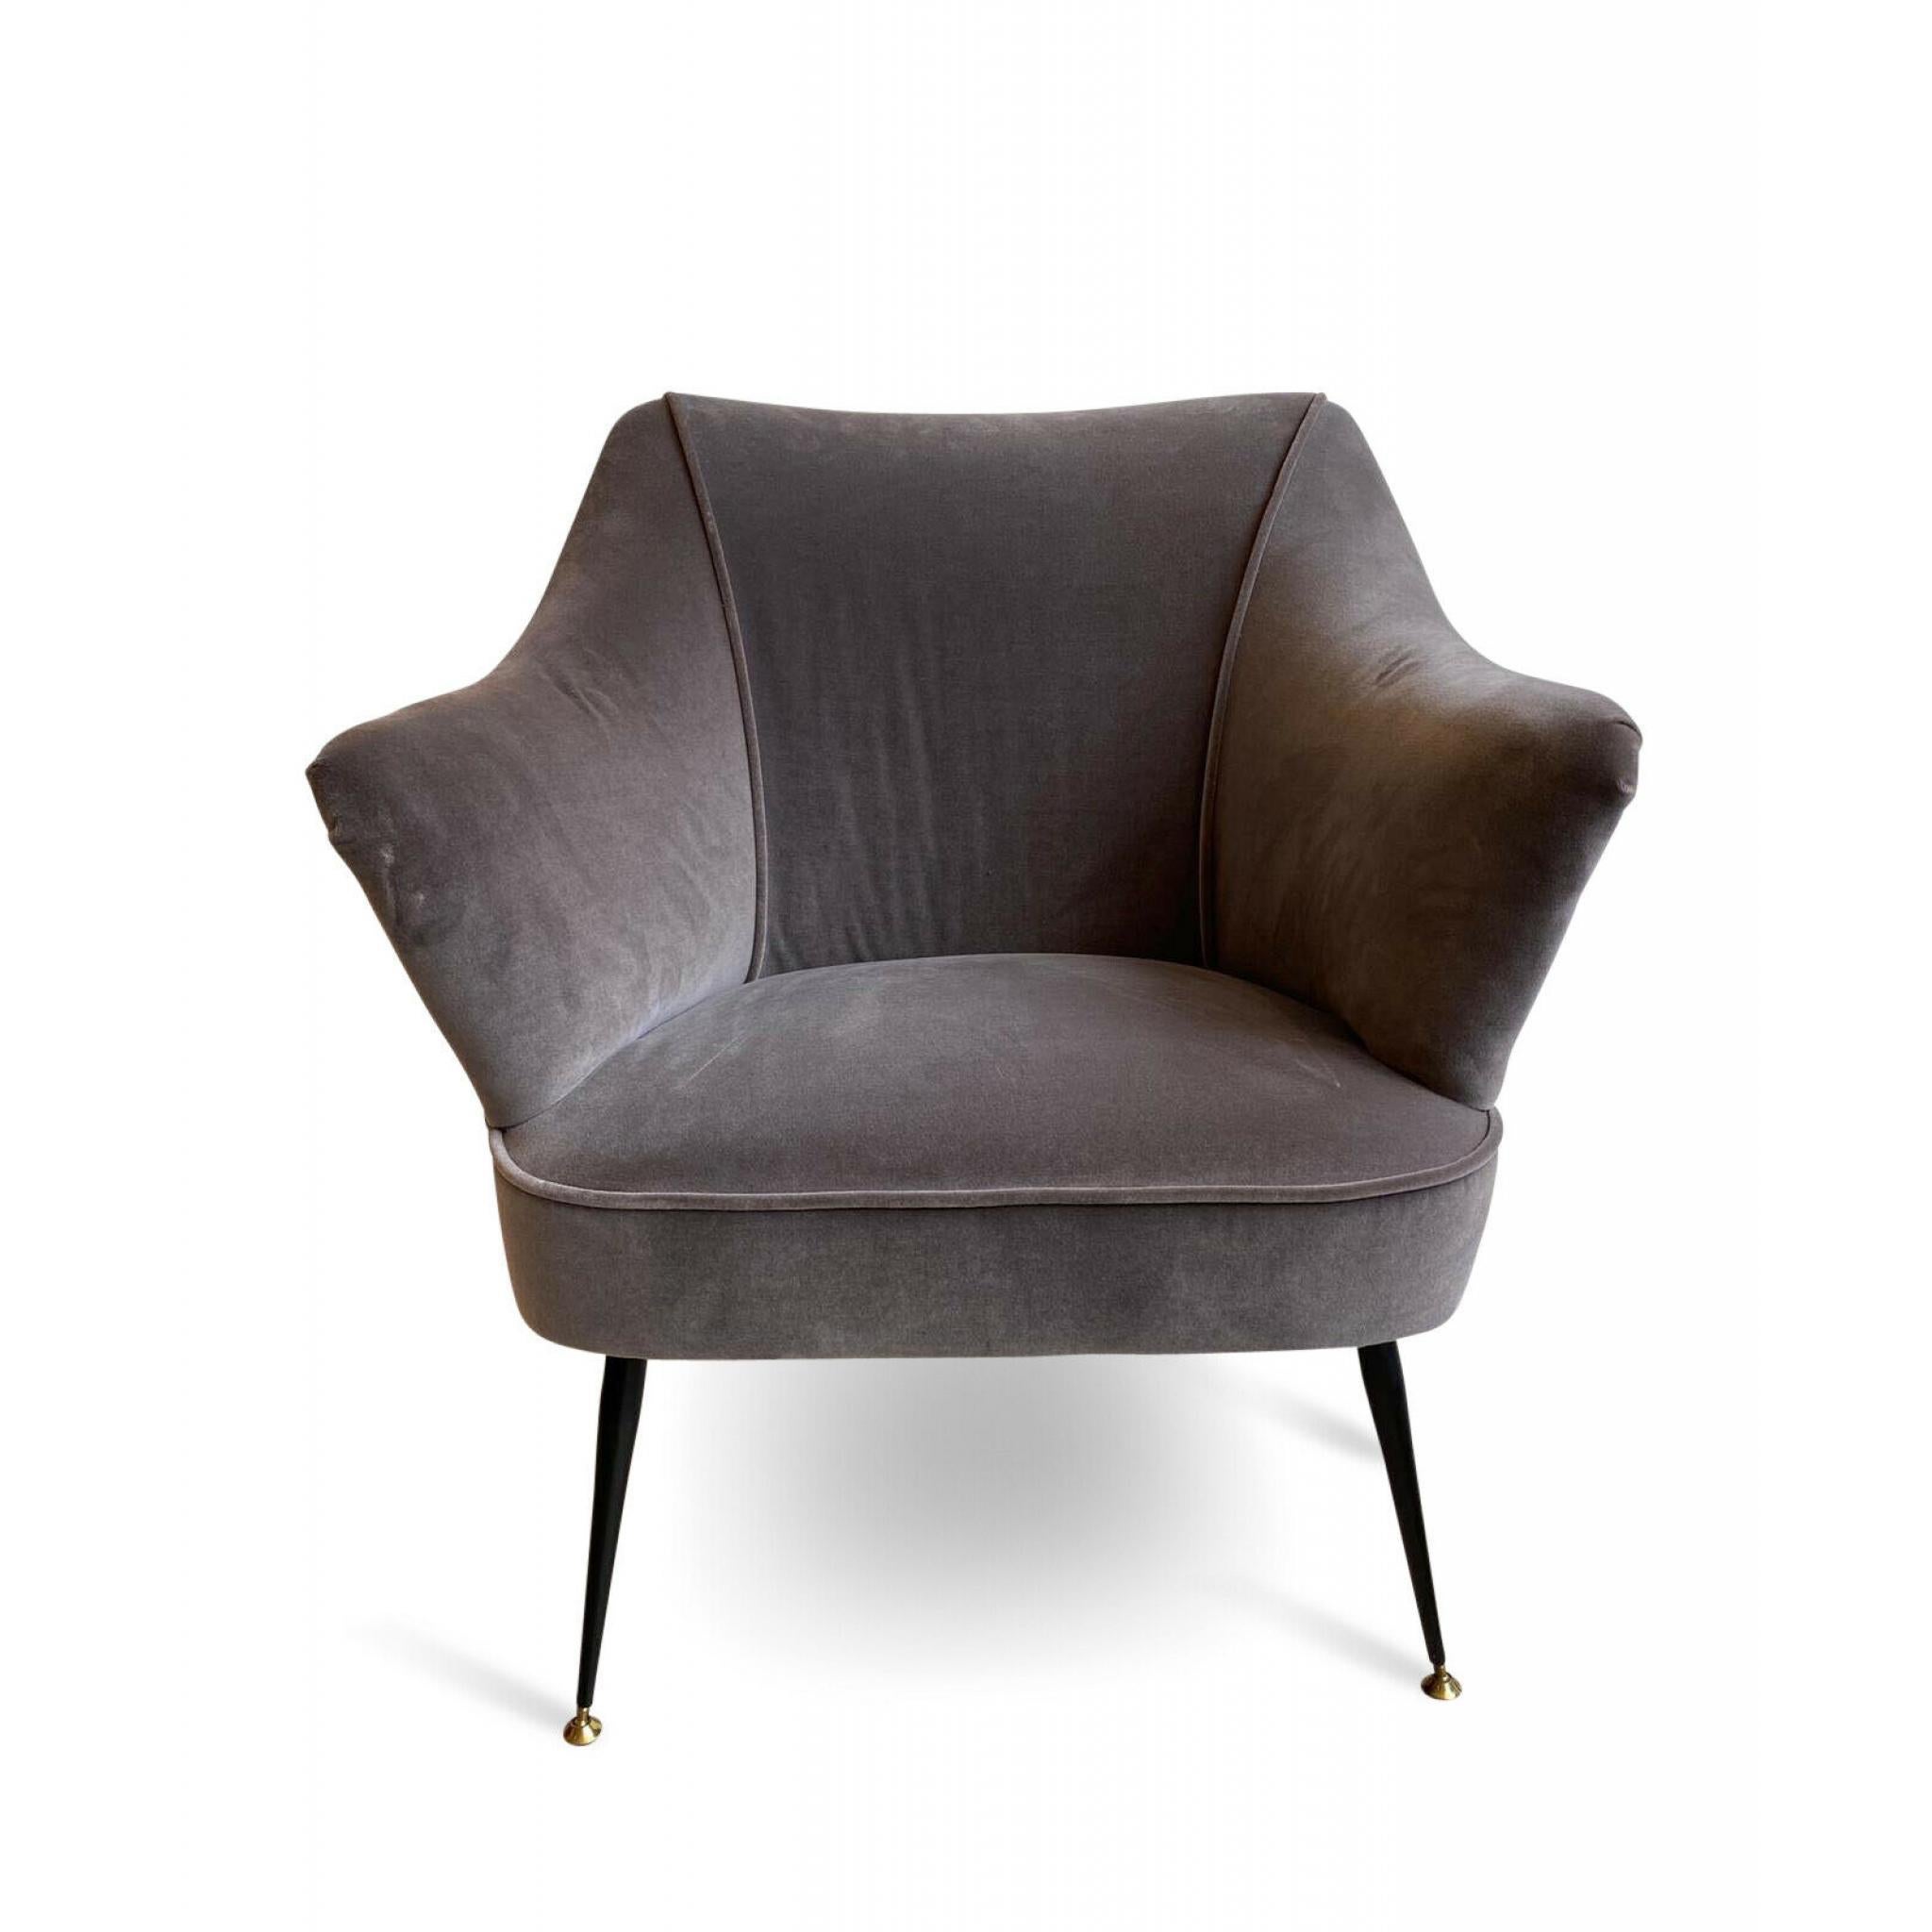 A beautiful and petit 1950s Italian armchair recently reupholstered in a light grey velvet with stud details in the manner of Gio Ponti sat on tall thin black metal legs with brass feet.